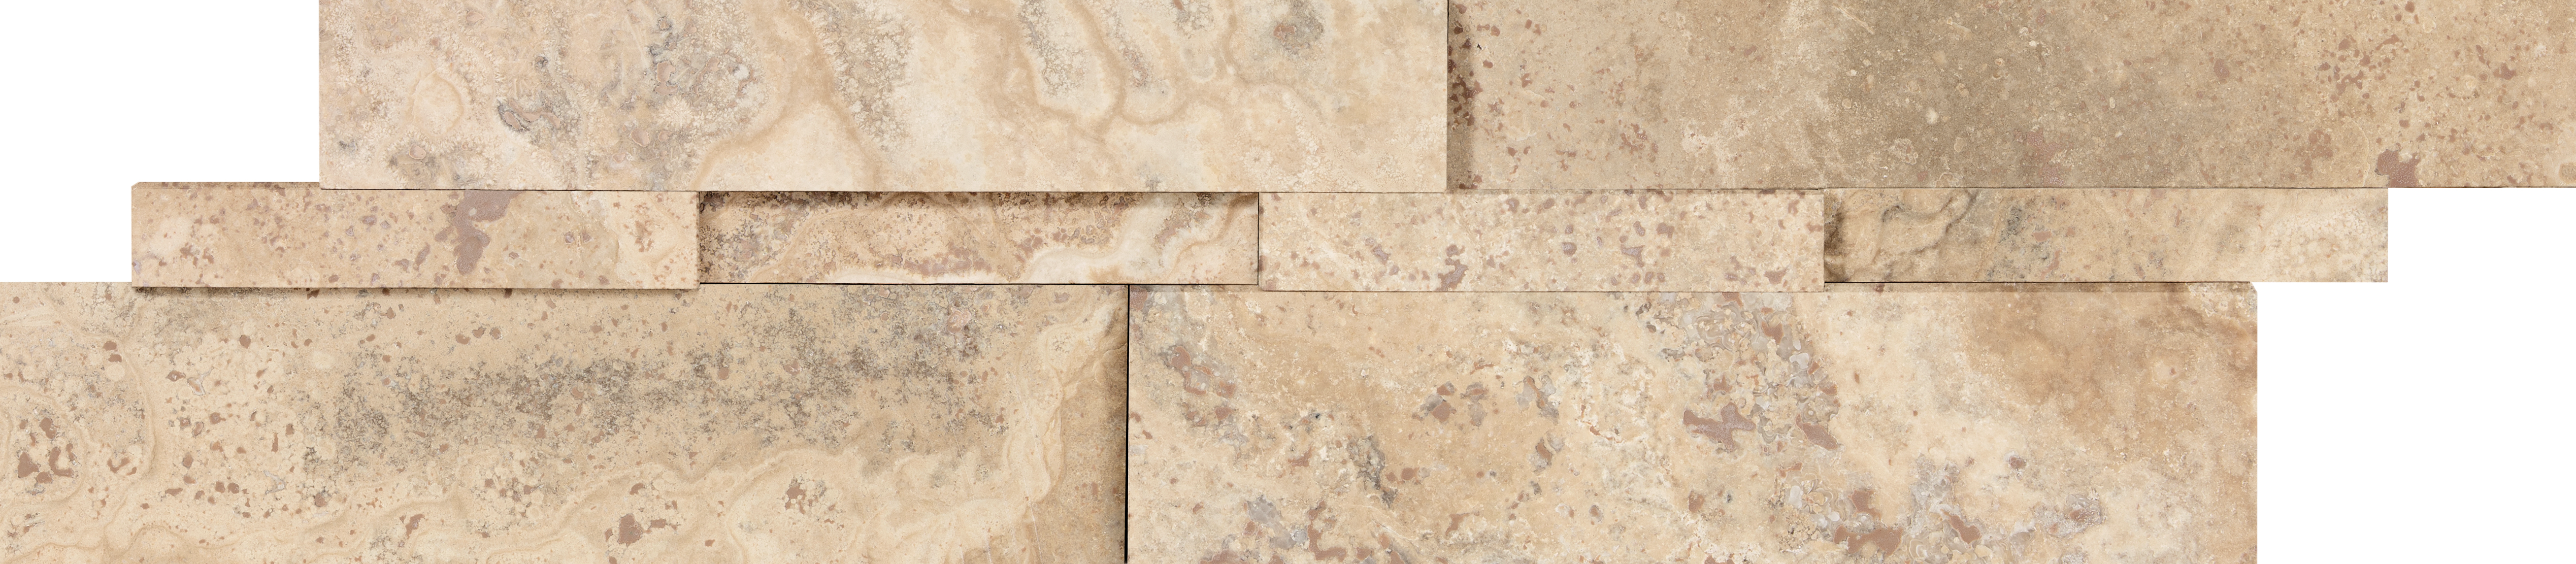 travertine picasso pattern natural stone wall panel from cubics anatolia collection distributed by surface group international honed finish straight edge edge 6x24 interlocking shape